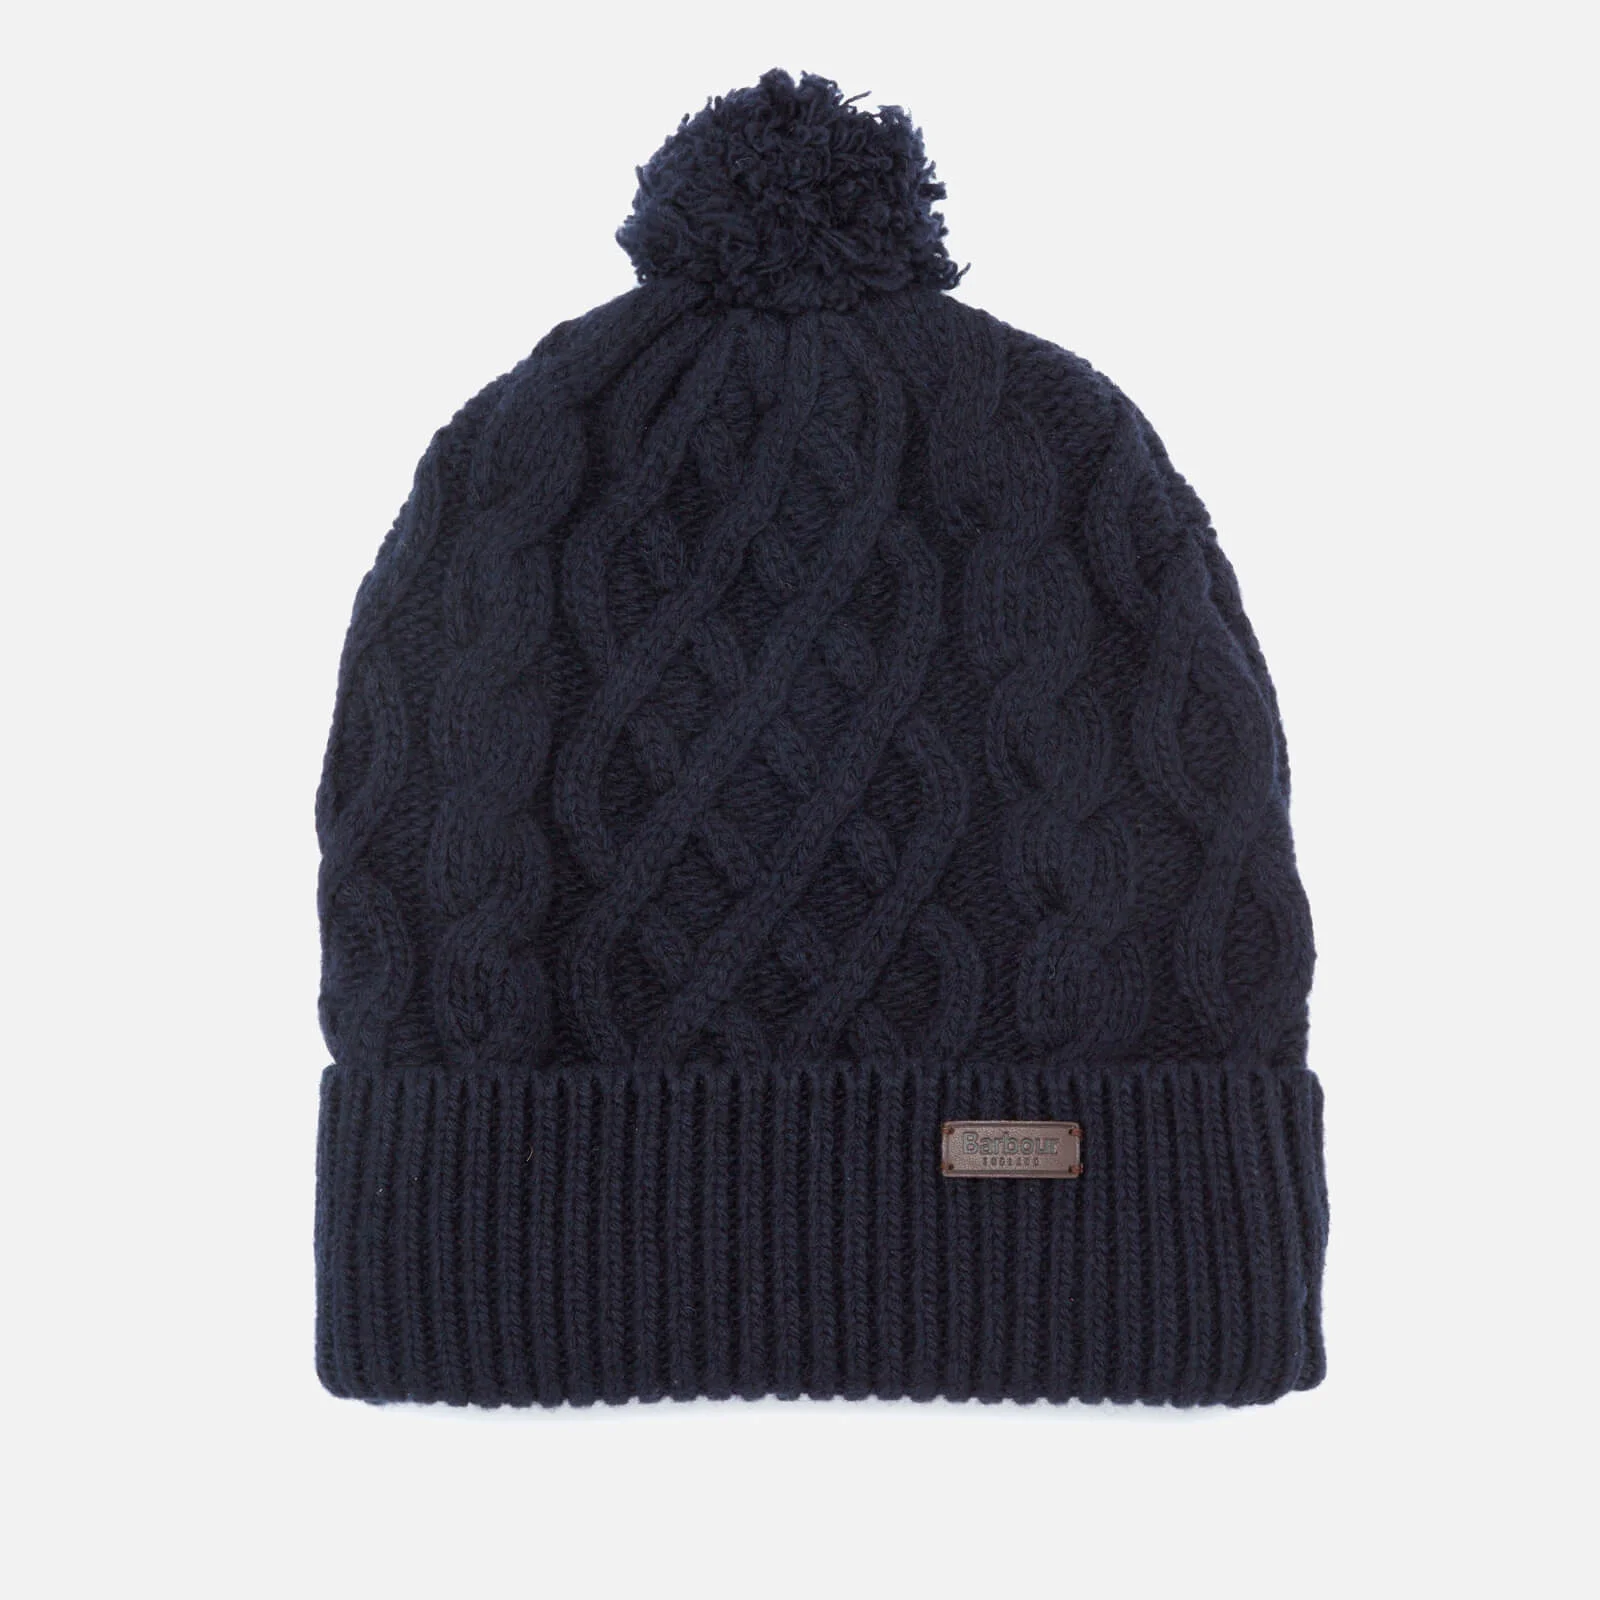 Barbour Cable Knit Beanie Hat - Navy Image 1